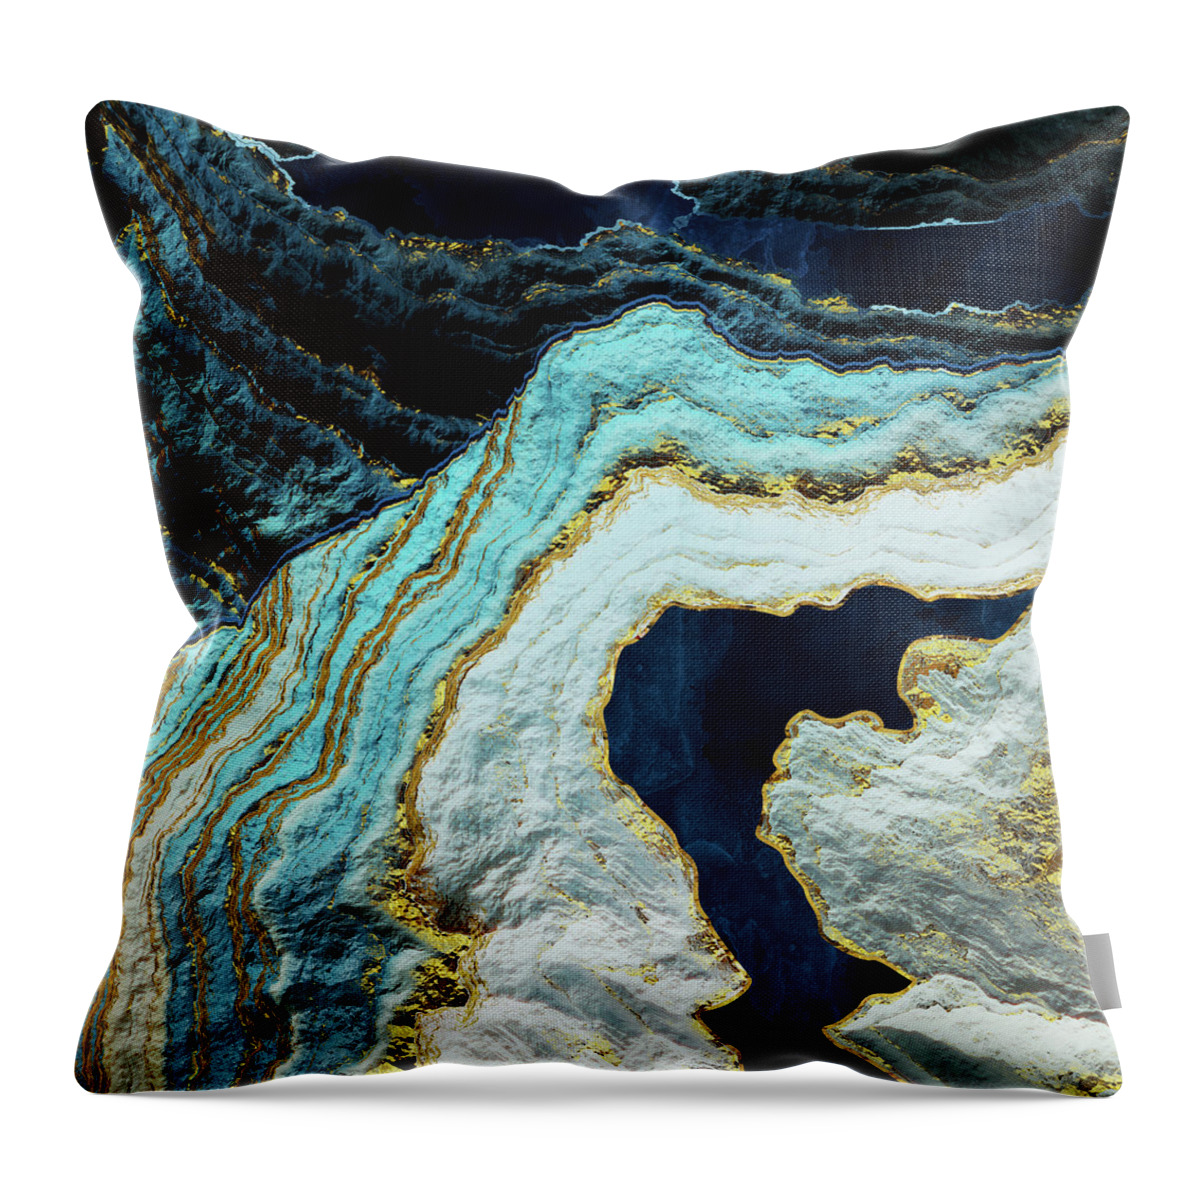 Gold Throw Pillow featuring the digital art Aerial Ocean Abstract by Spacefrog Designs